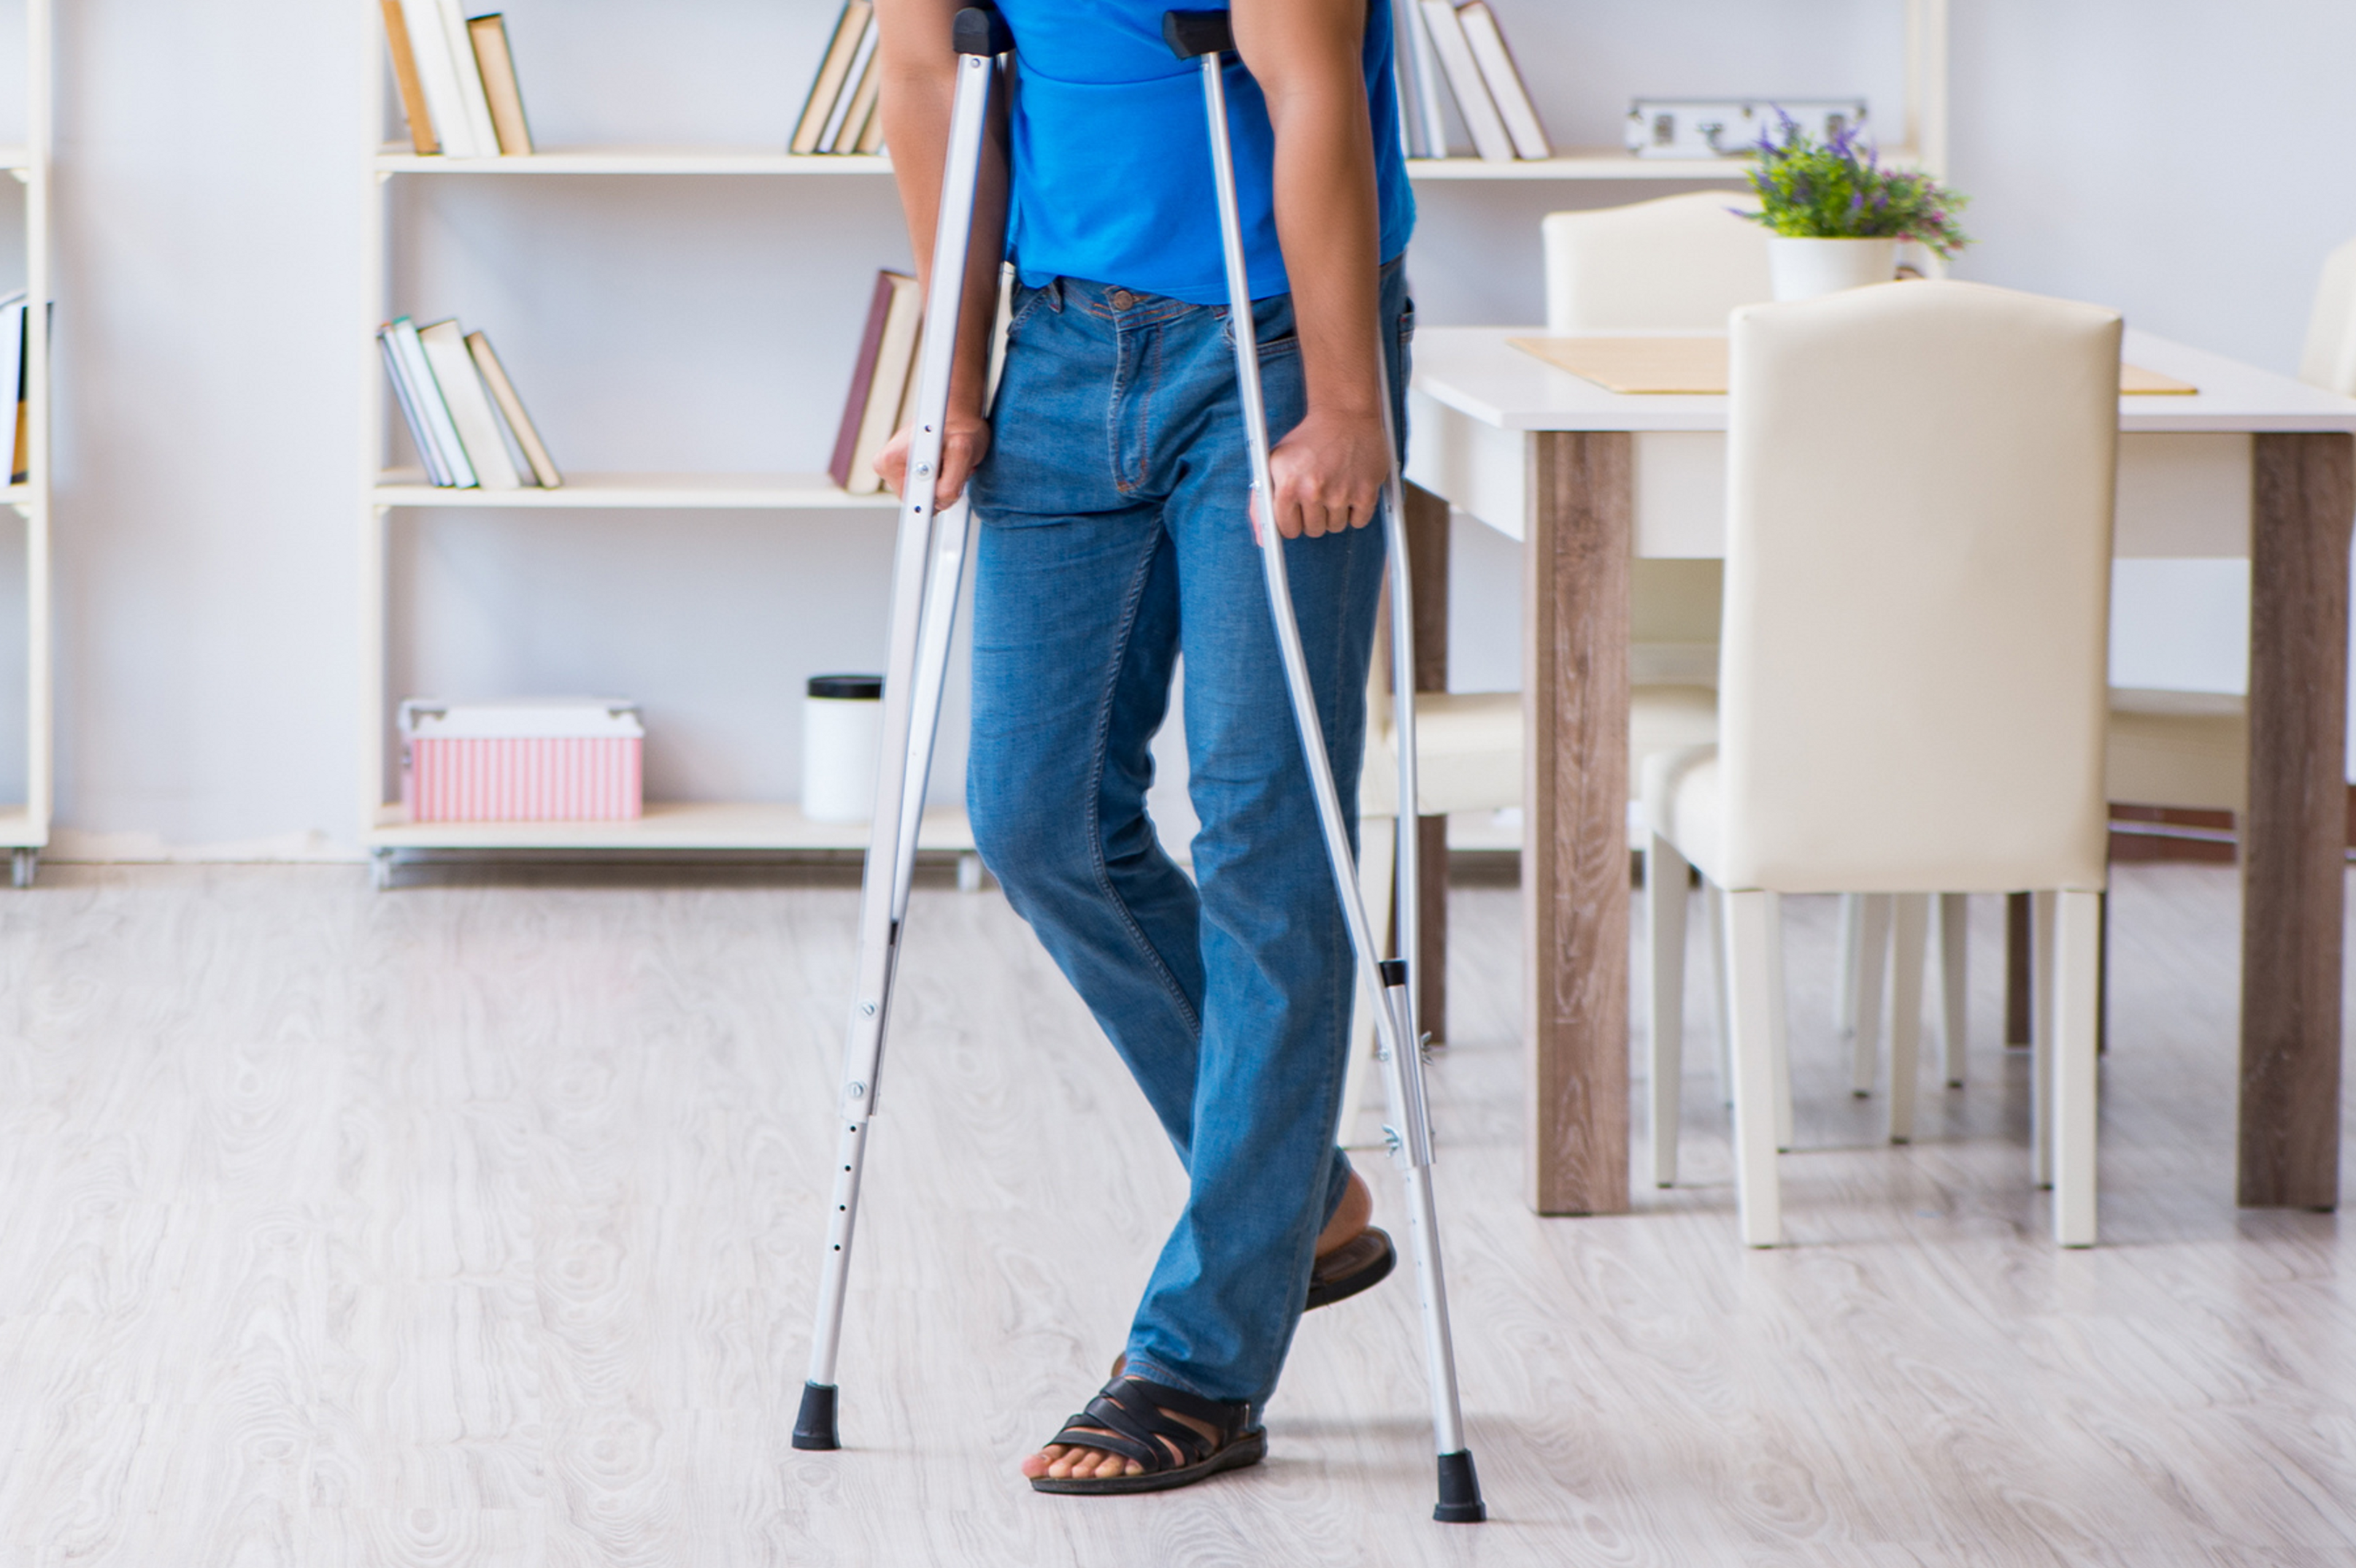 Severe calf strains may require crutches to allow recovery.